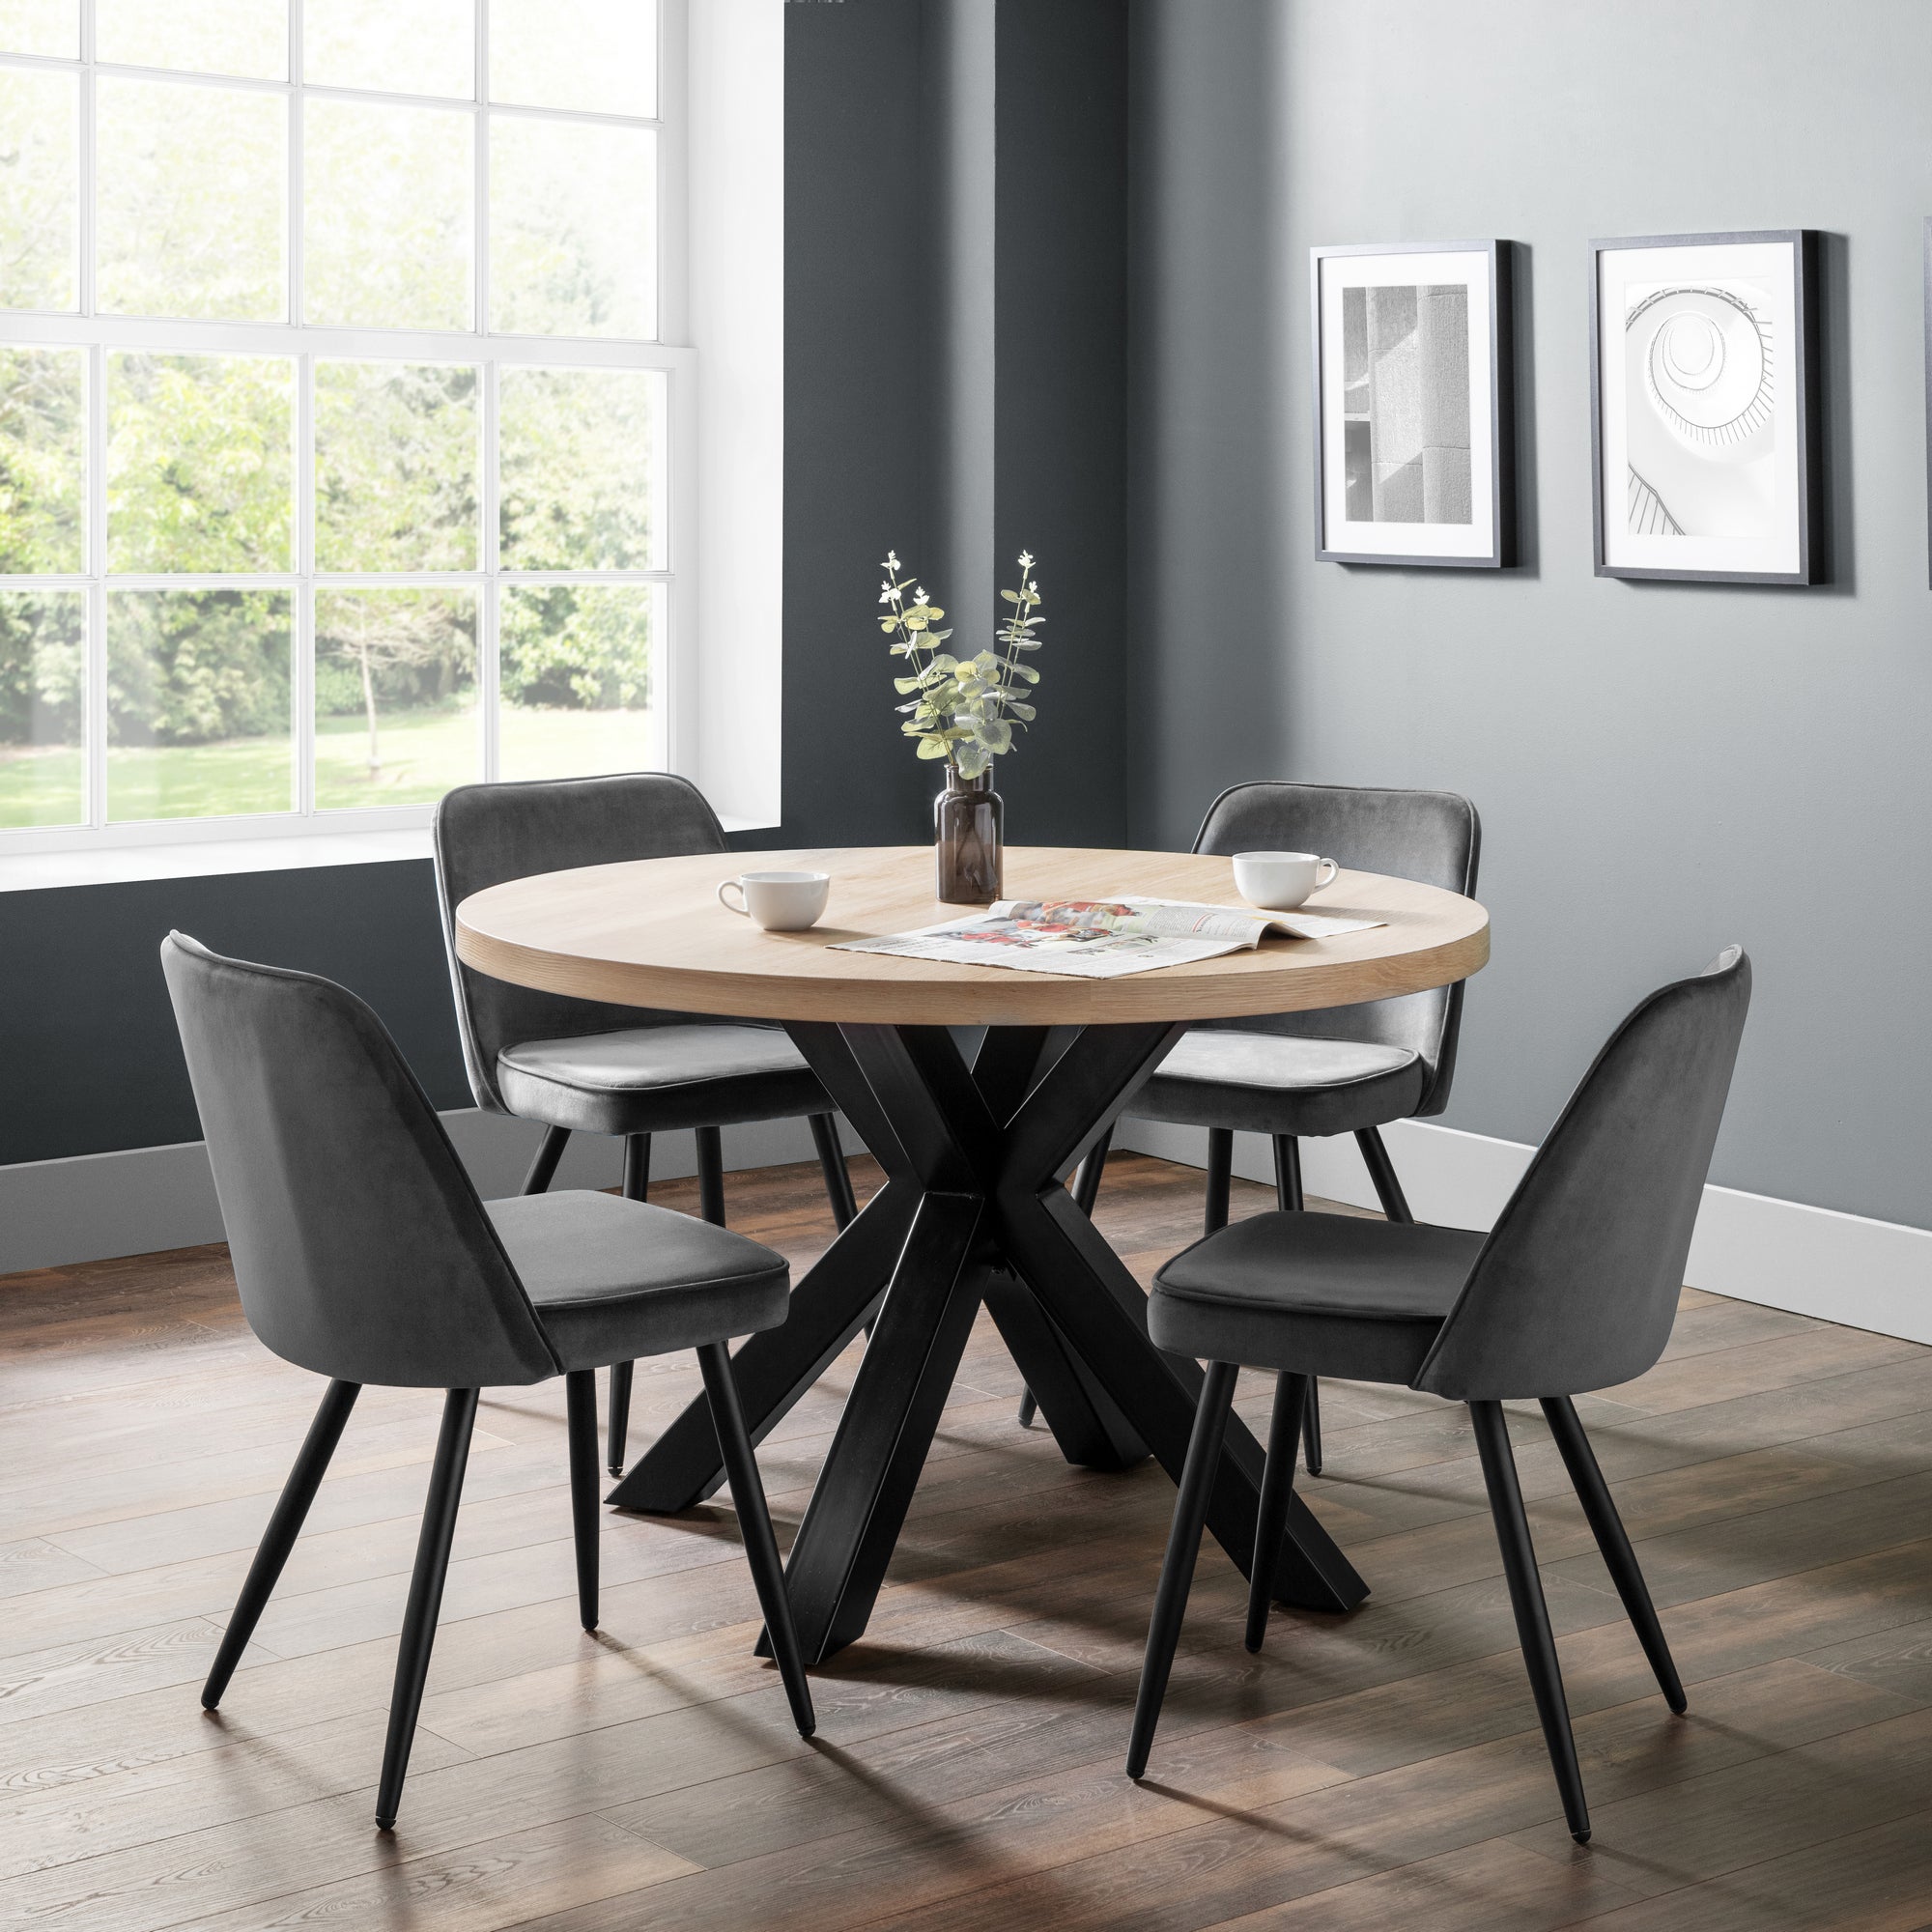 Berwick Round Dining Table With 4 Burgess Chairs Grey